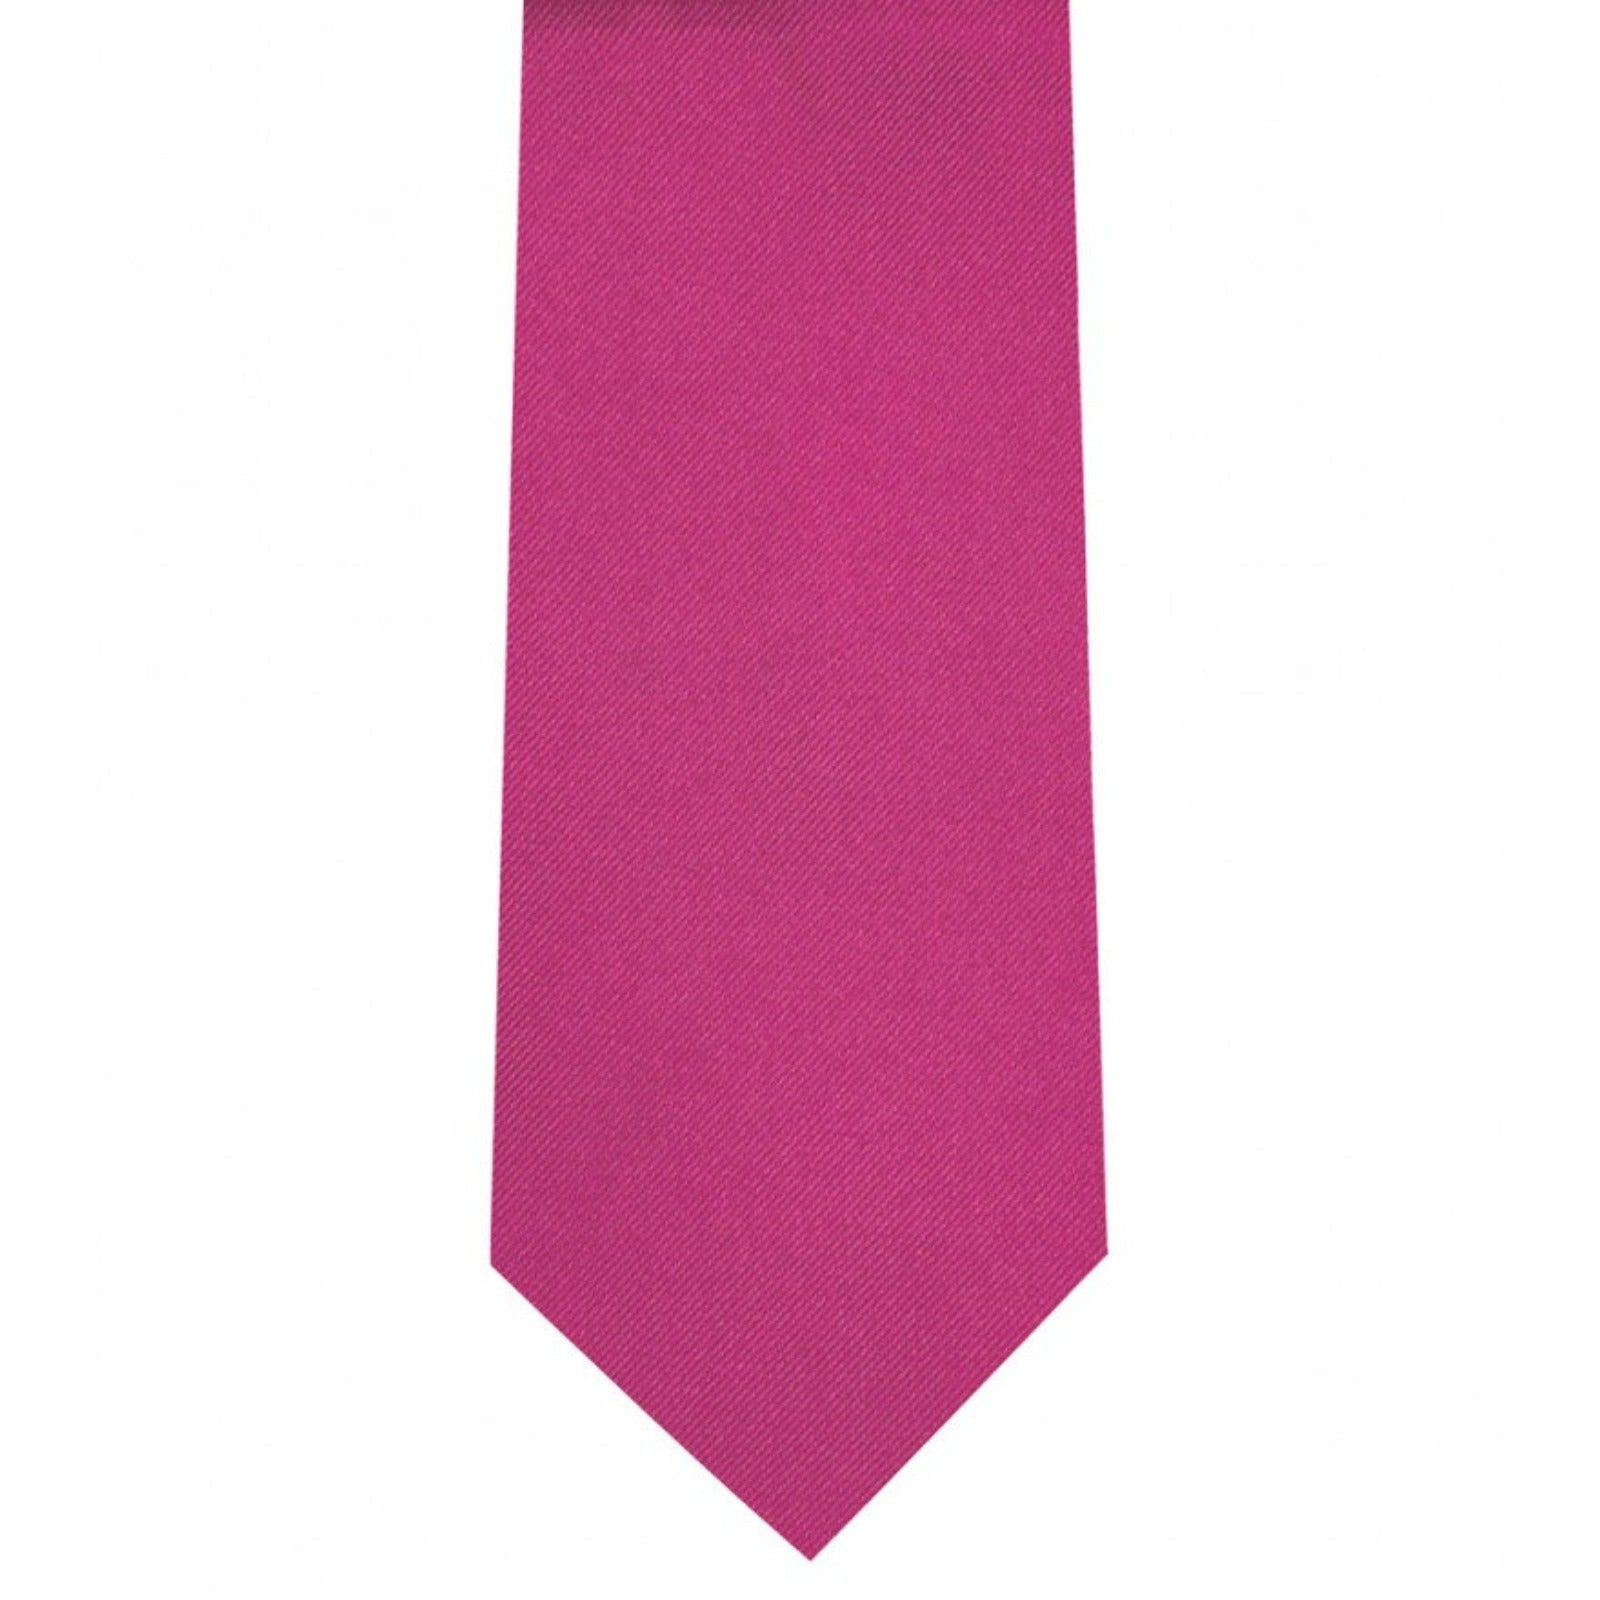 Classic Fuchsia Tie Ultra Skinny tie width 2.25 inches With Matching Pocket Square | KCT Menswear